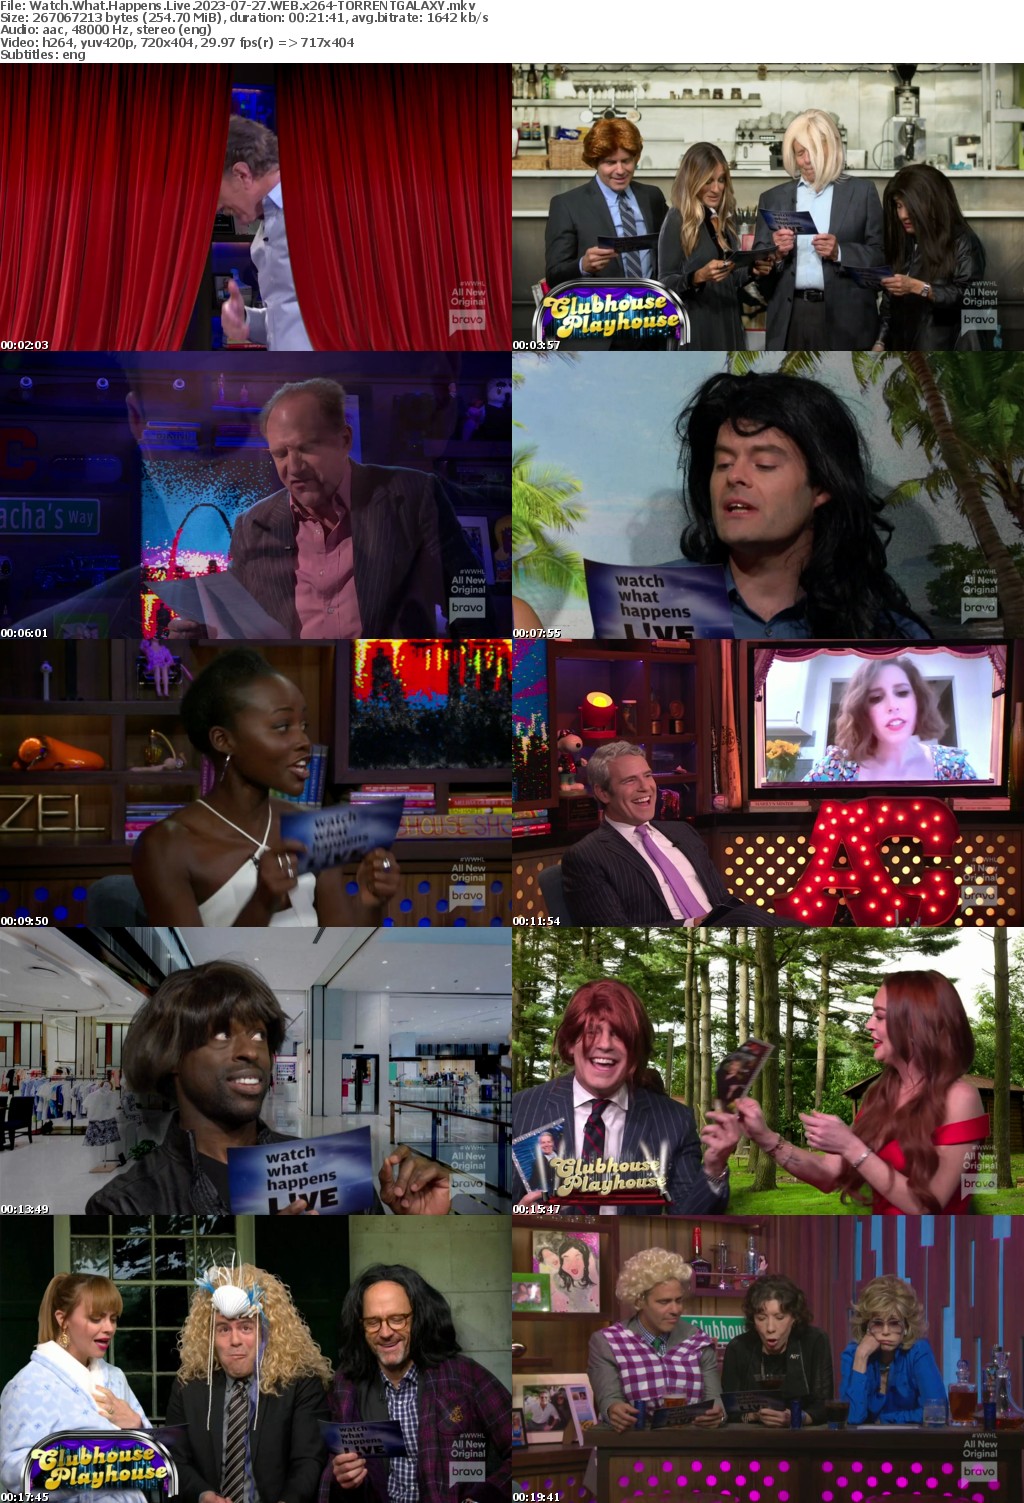 Watch What Happens Live 2023-07-27 WEB x264-GALAXY